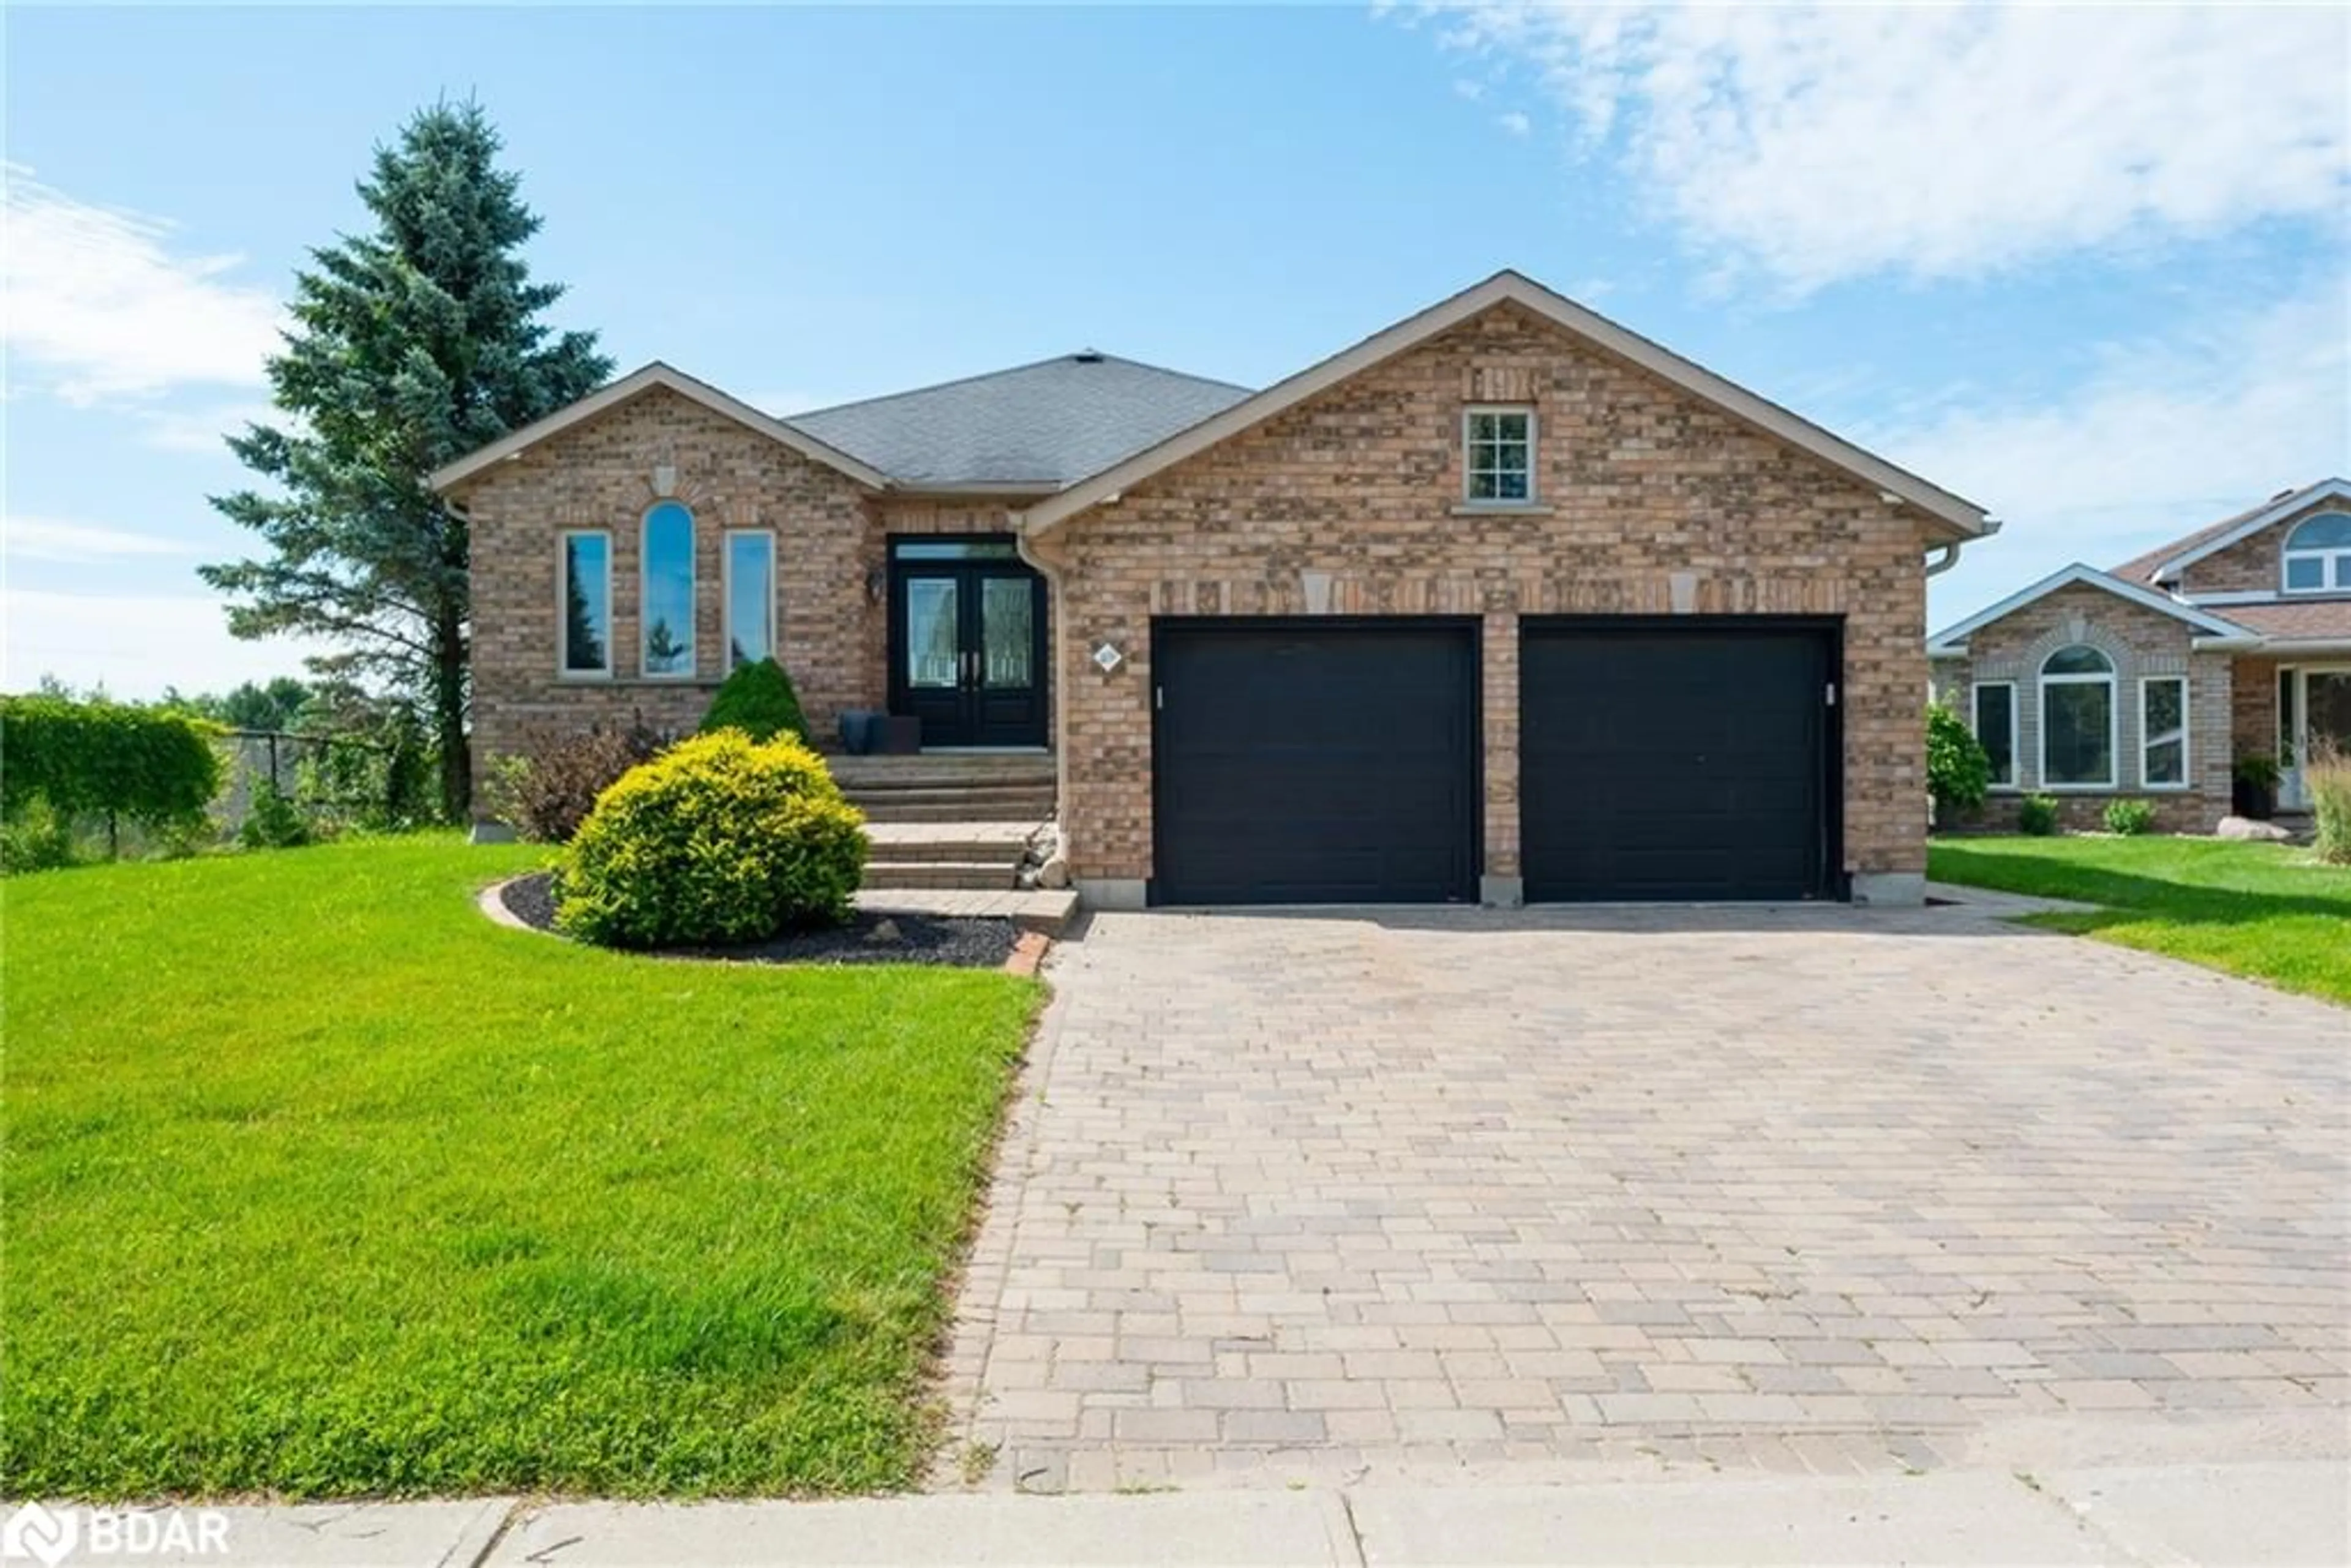 Home with brick exterior material for 59 Logan Crt, Barrie Ontario L4N 8G8